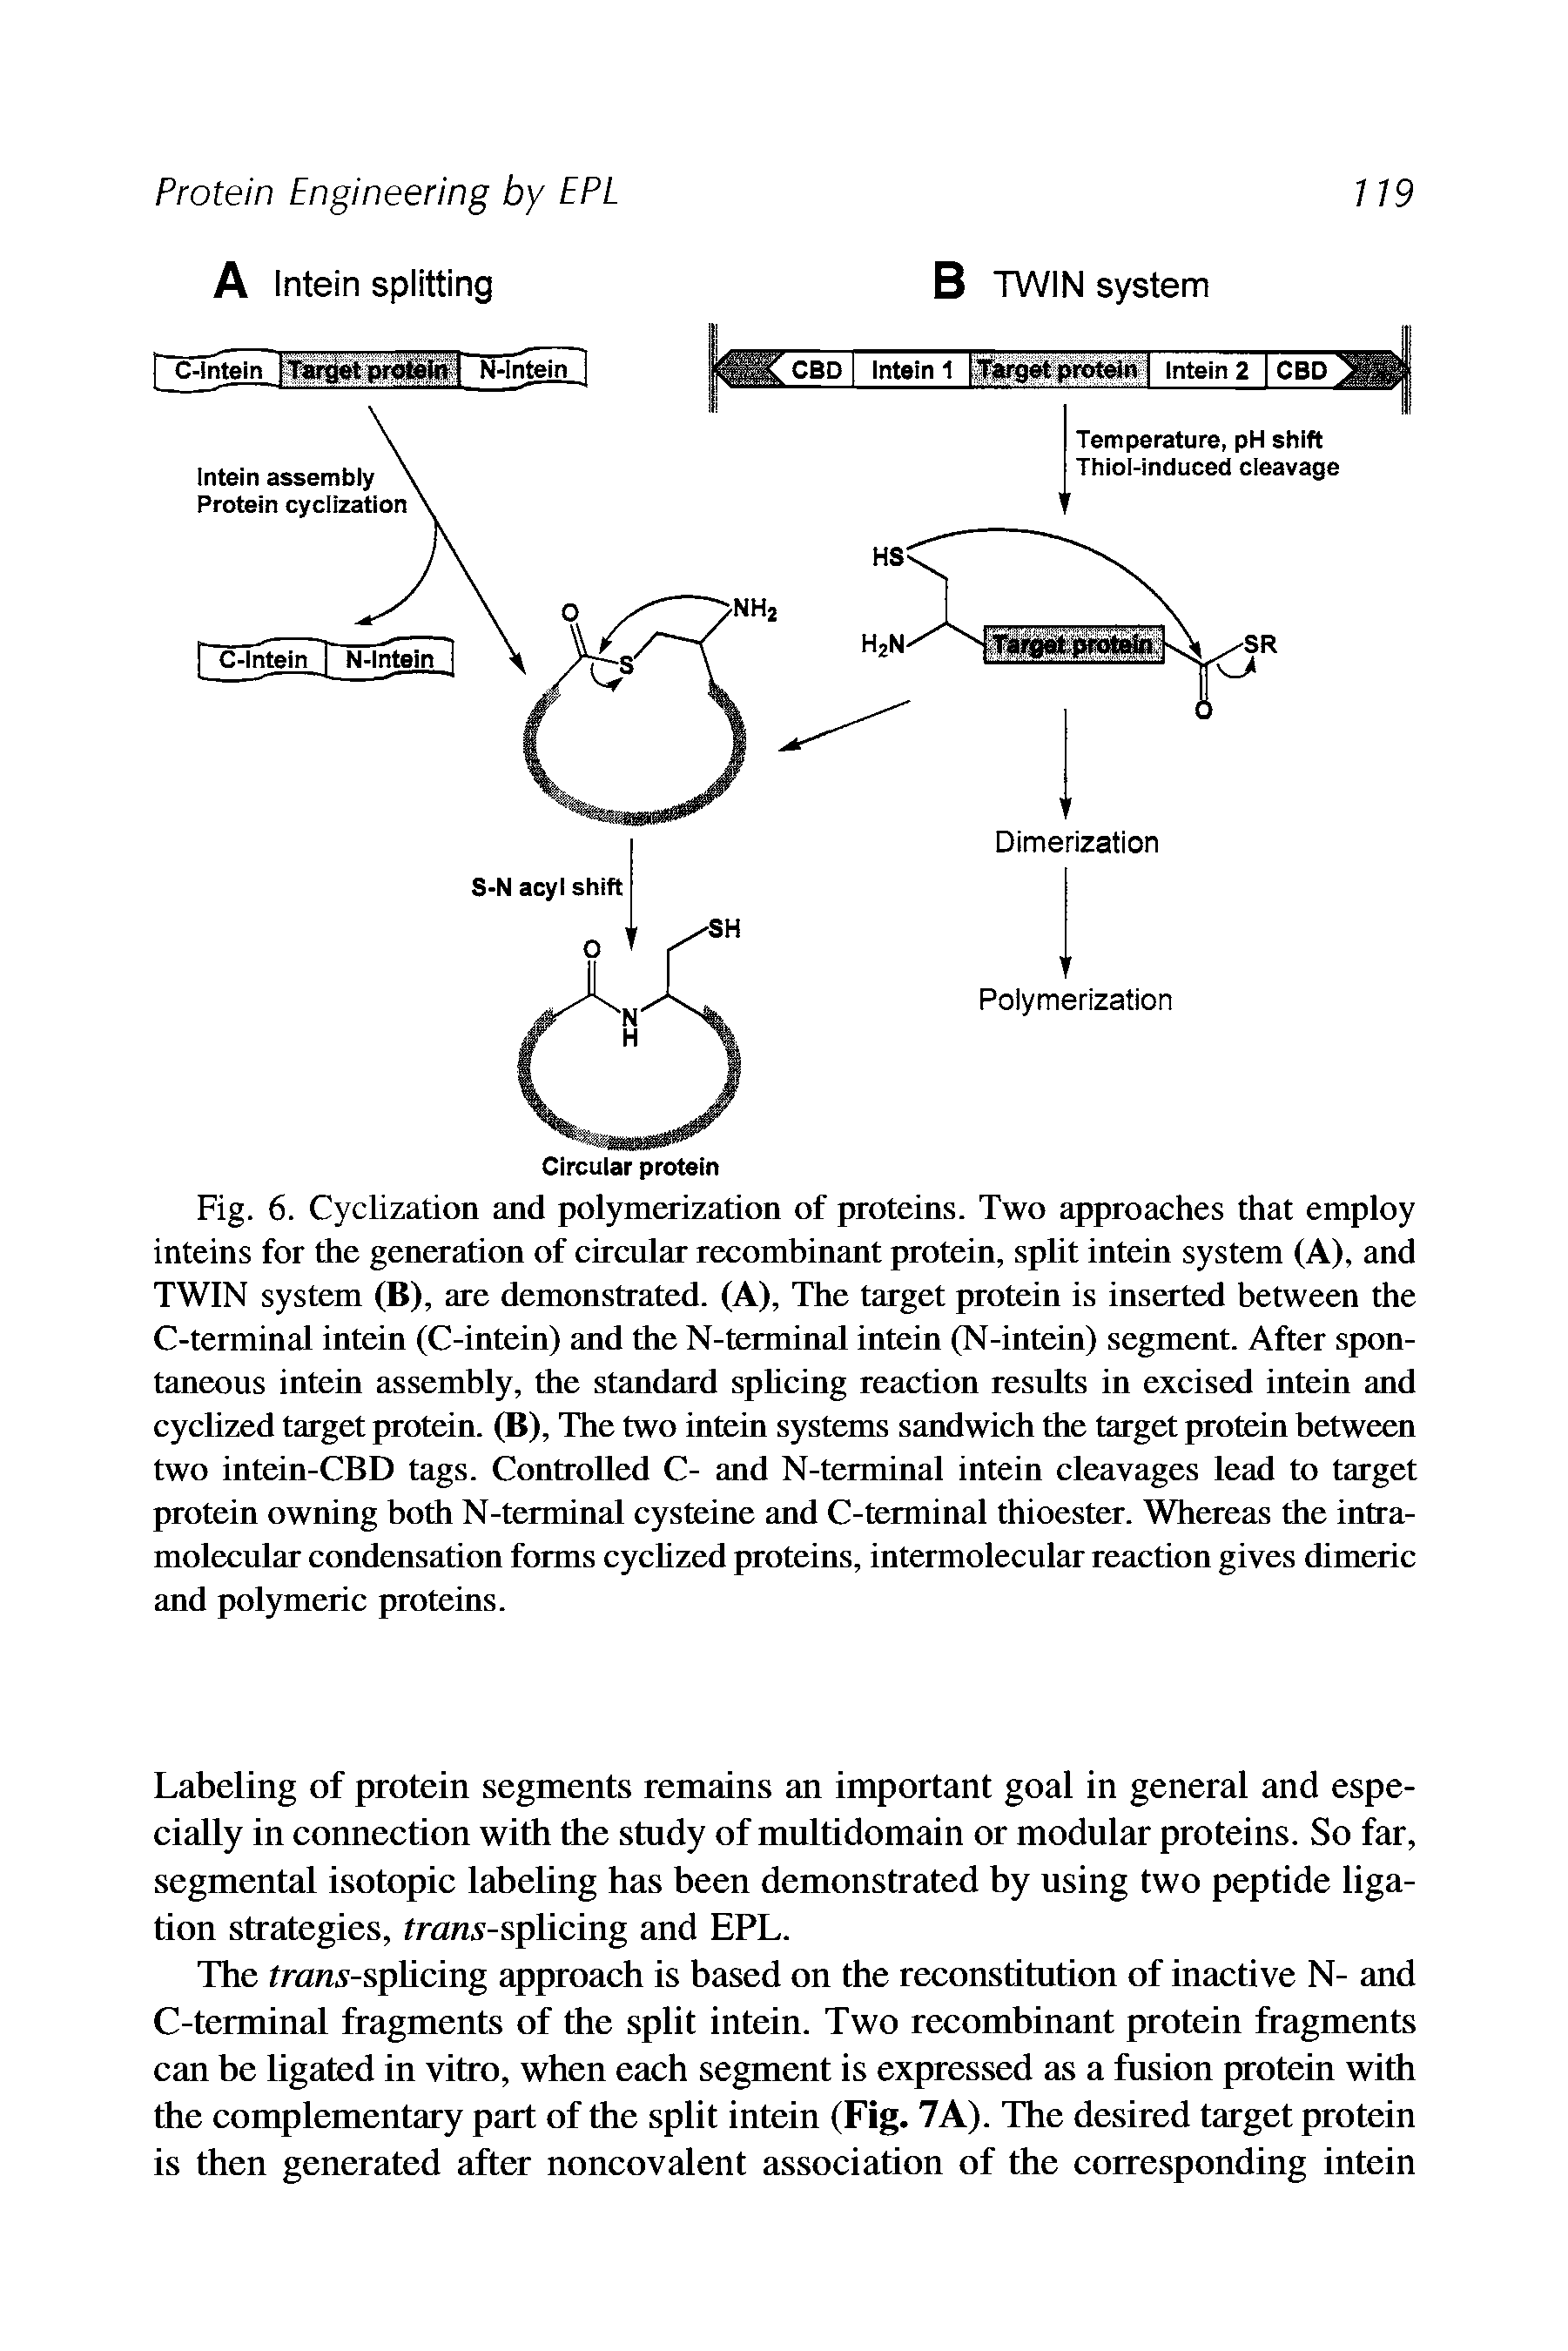 Fig. 6. Cyclization and polymerization of proteins. Two approaches that employ inteins for the generation of circular recombinant protein, split intein system (A), and TWIN system (B), are demonstrated. (A), The target protein is inserted between the C-terminal intein (C-intein) and the N-terminal intein (N-intein) segment. After spontaneous intein assembly, the standard splicing reaction results in excised intein and cyclized target protein. (B), The two intein systems sandwich the target protein between two intein-CBD tags. Controlled C- and N-terminal intein cleavages lead to target protein owning both N-terminal cysteine and C-terminal thioester. Whereas the intramolecular condensation forms cycUzed proteins, intermolecular reaction gives dimeric and polymeric proteins.